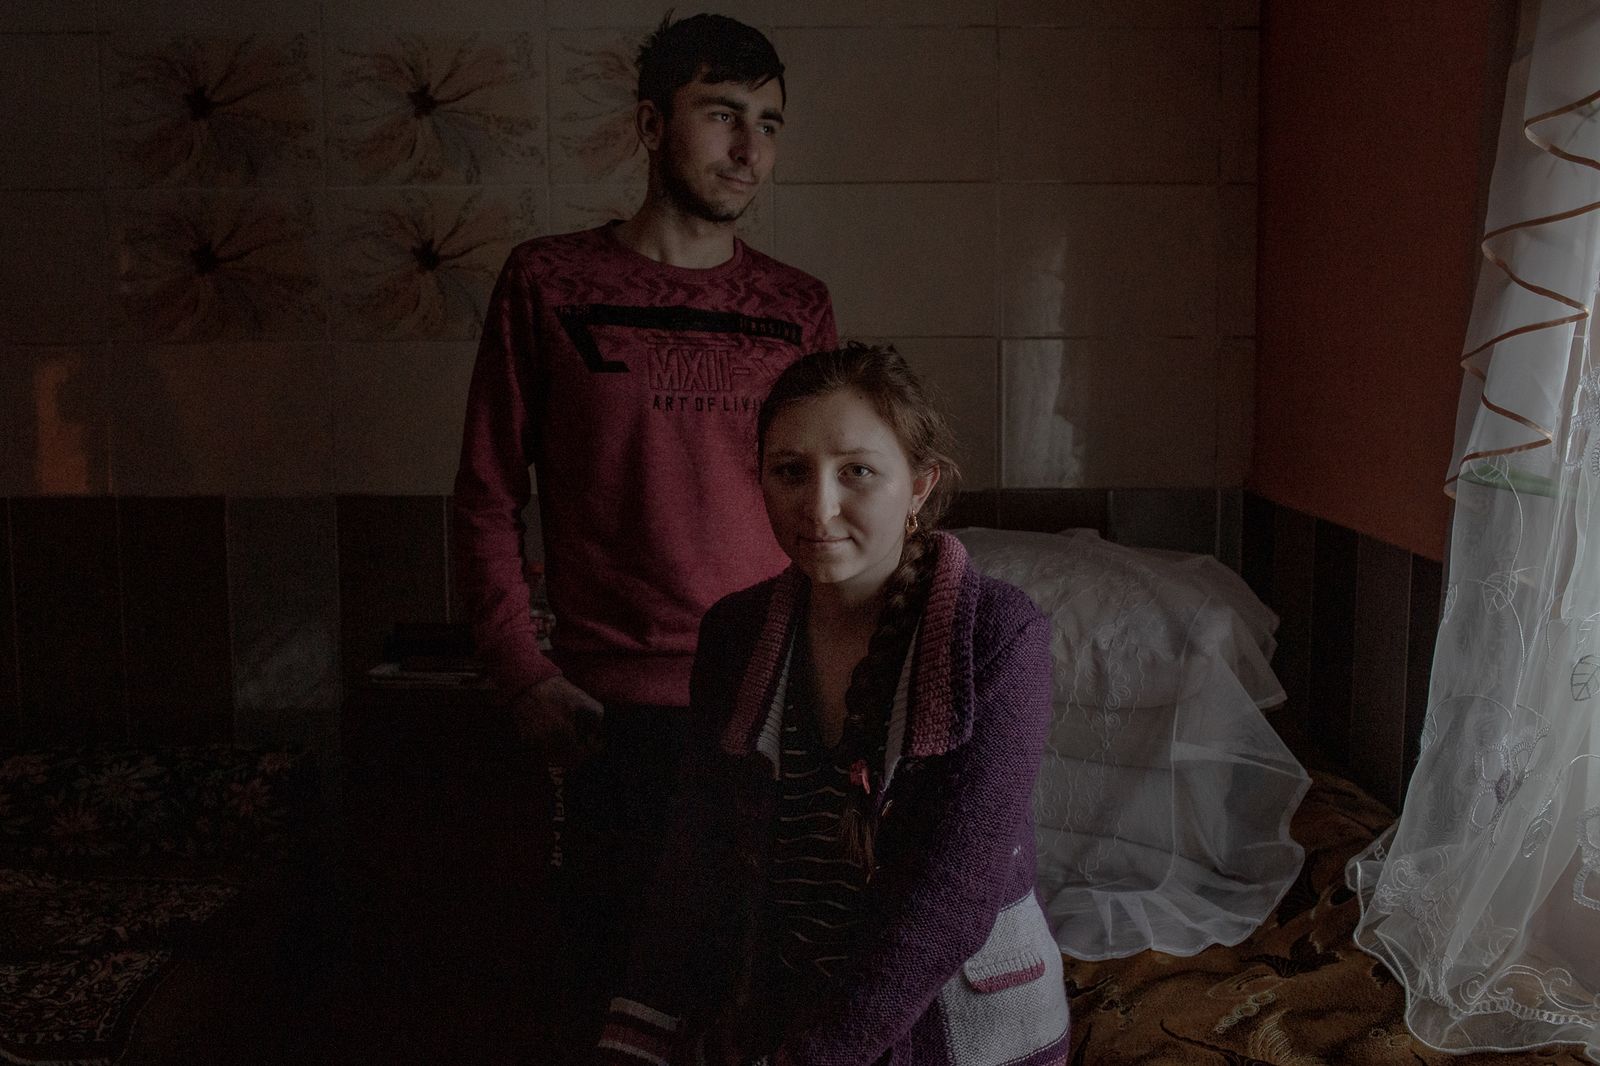 © Maurizio Gjivovich - the young Cristina 22 years old and Alexander 27 years old in their home in Comrat Gagauzia